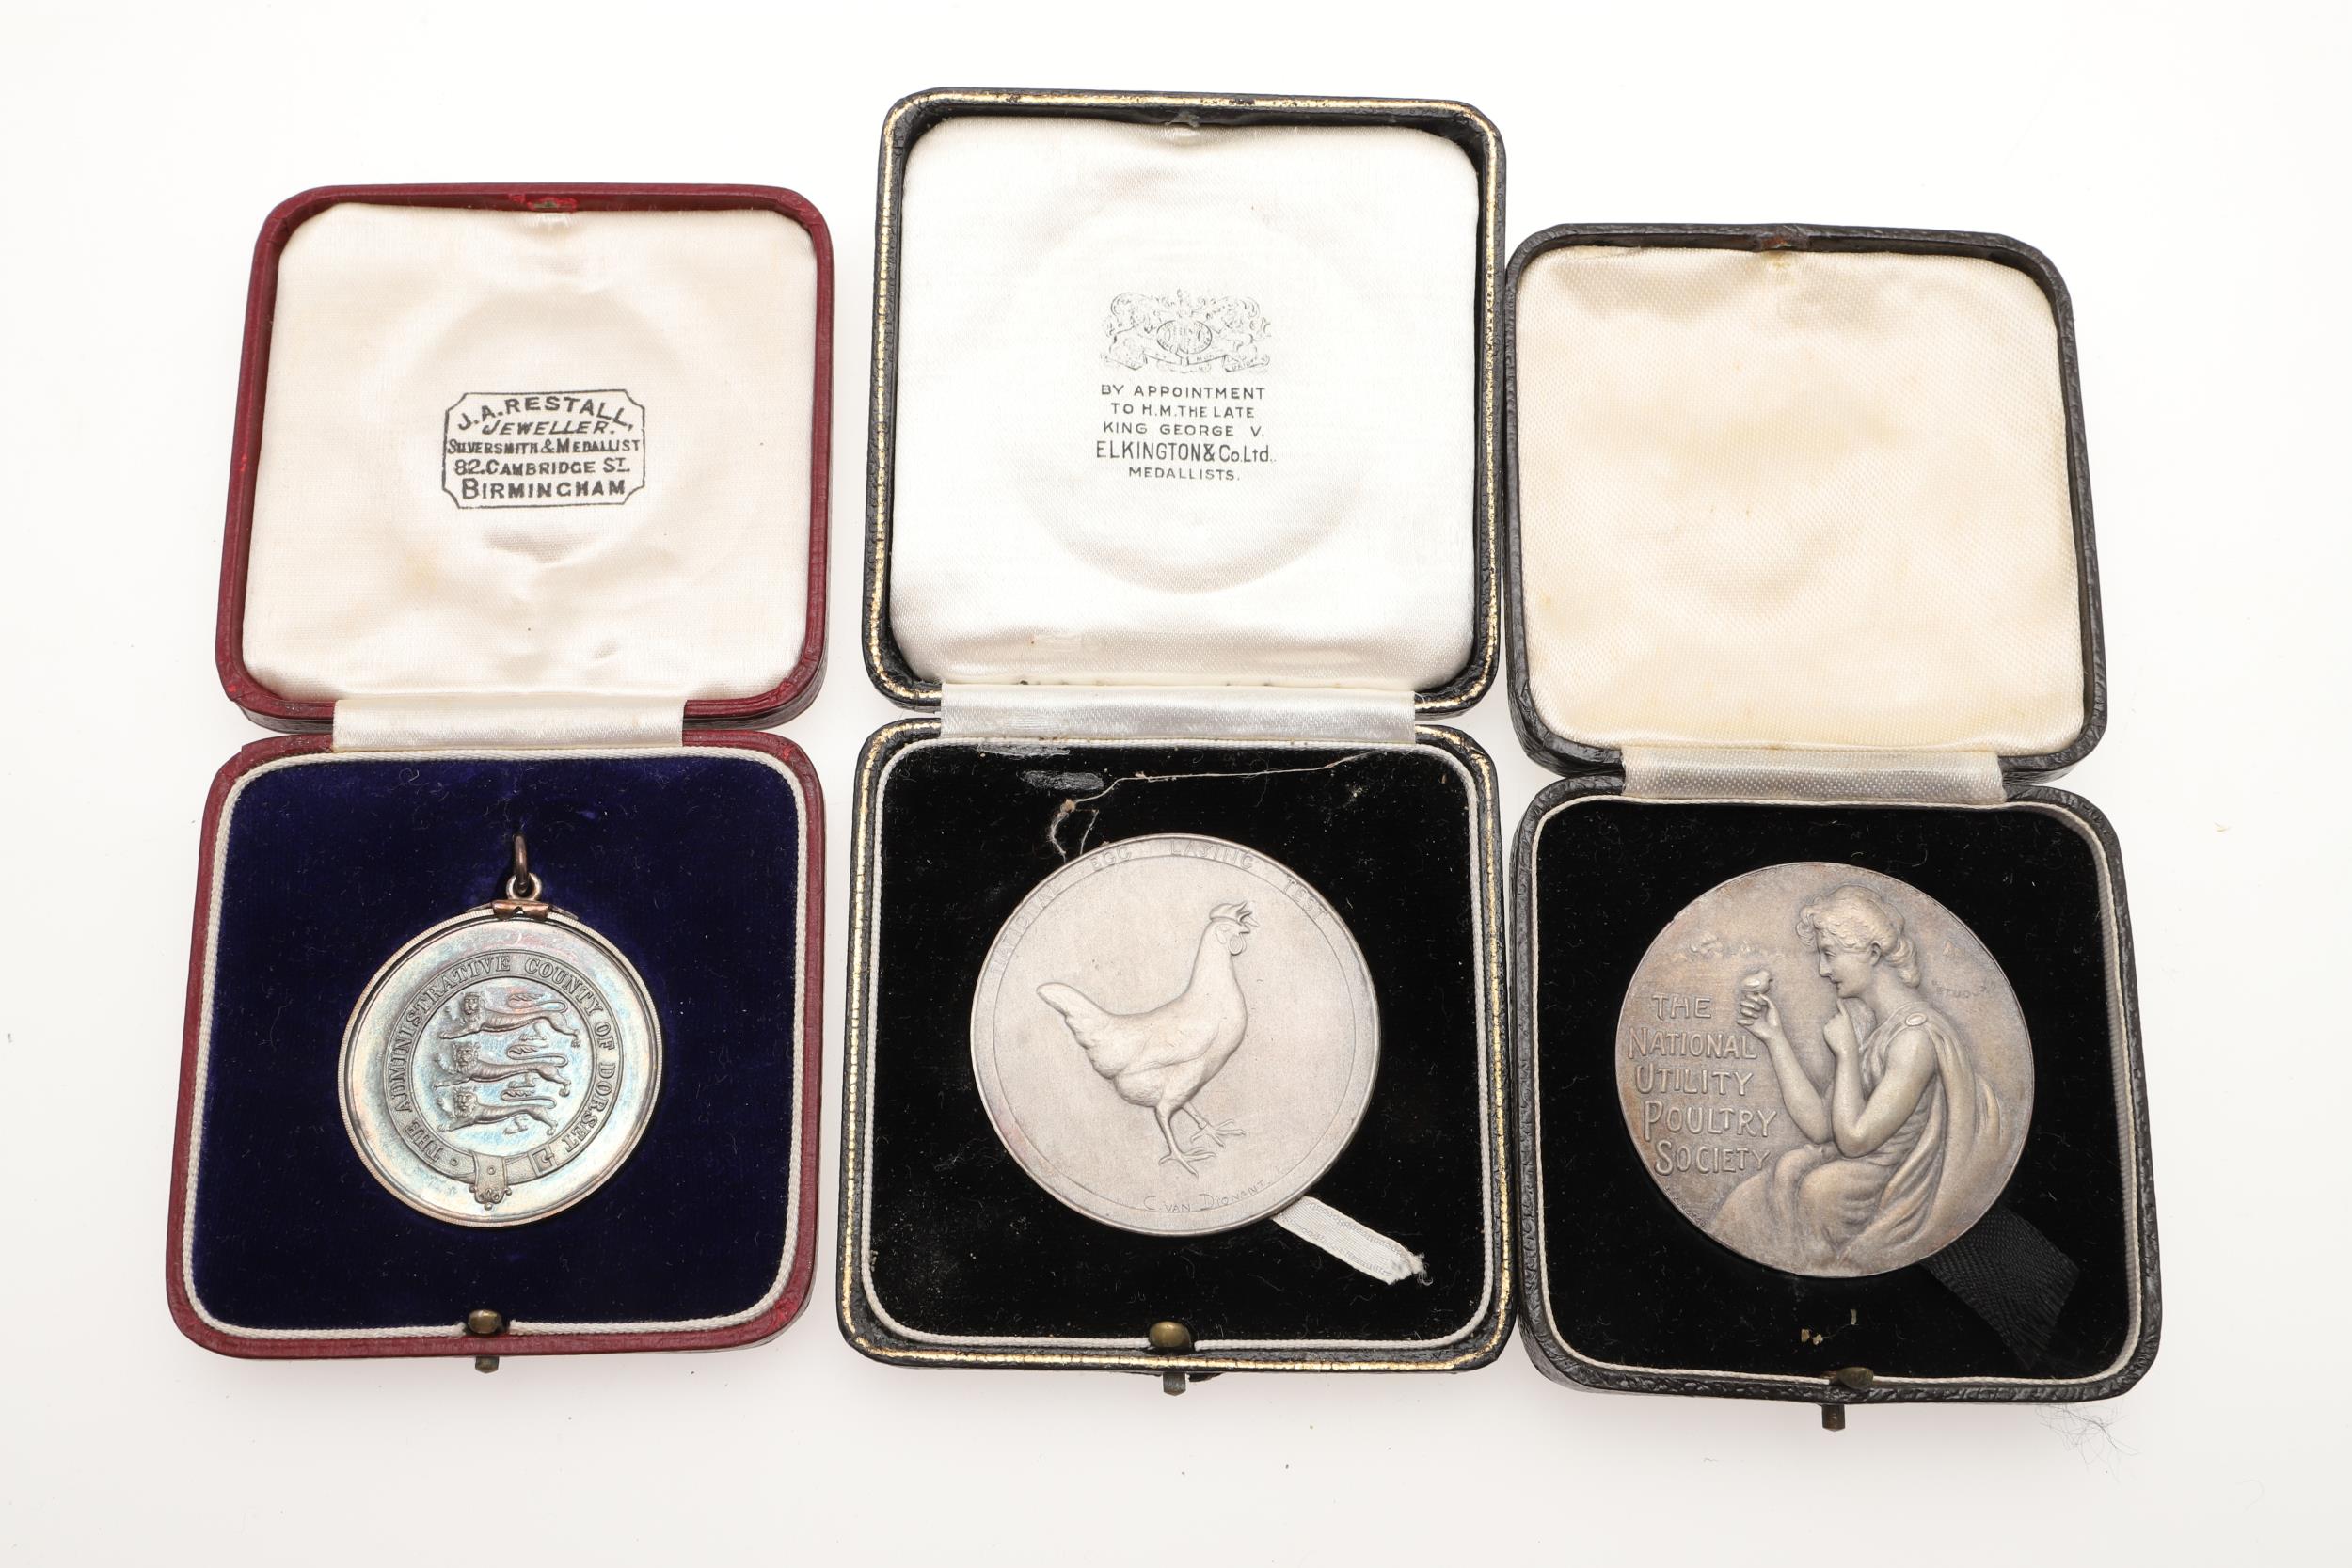 AN EXTENSIVE COLLECTION OF GOLD, SILVER AND BRONZE MEDALS FOR EGG LAYING. - Image 22 of 23